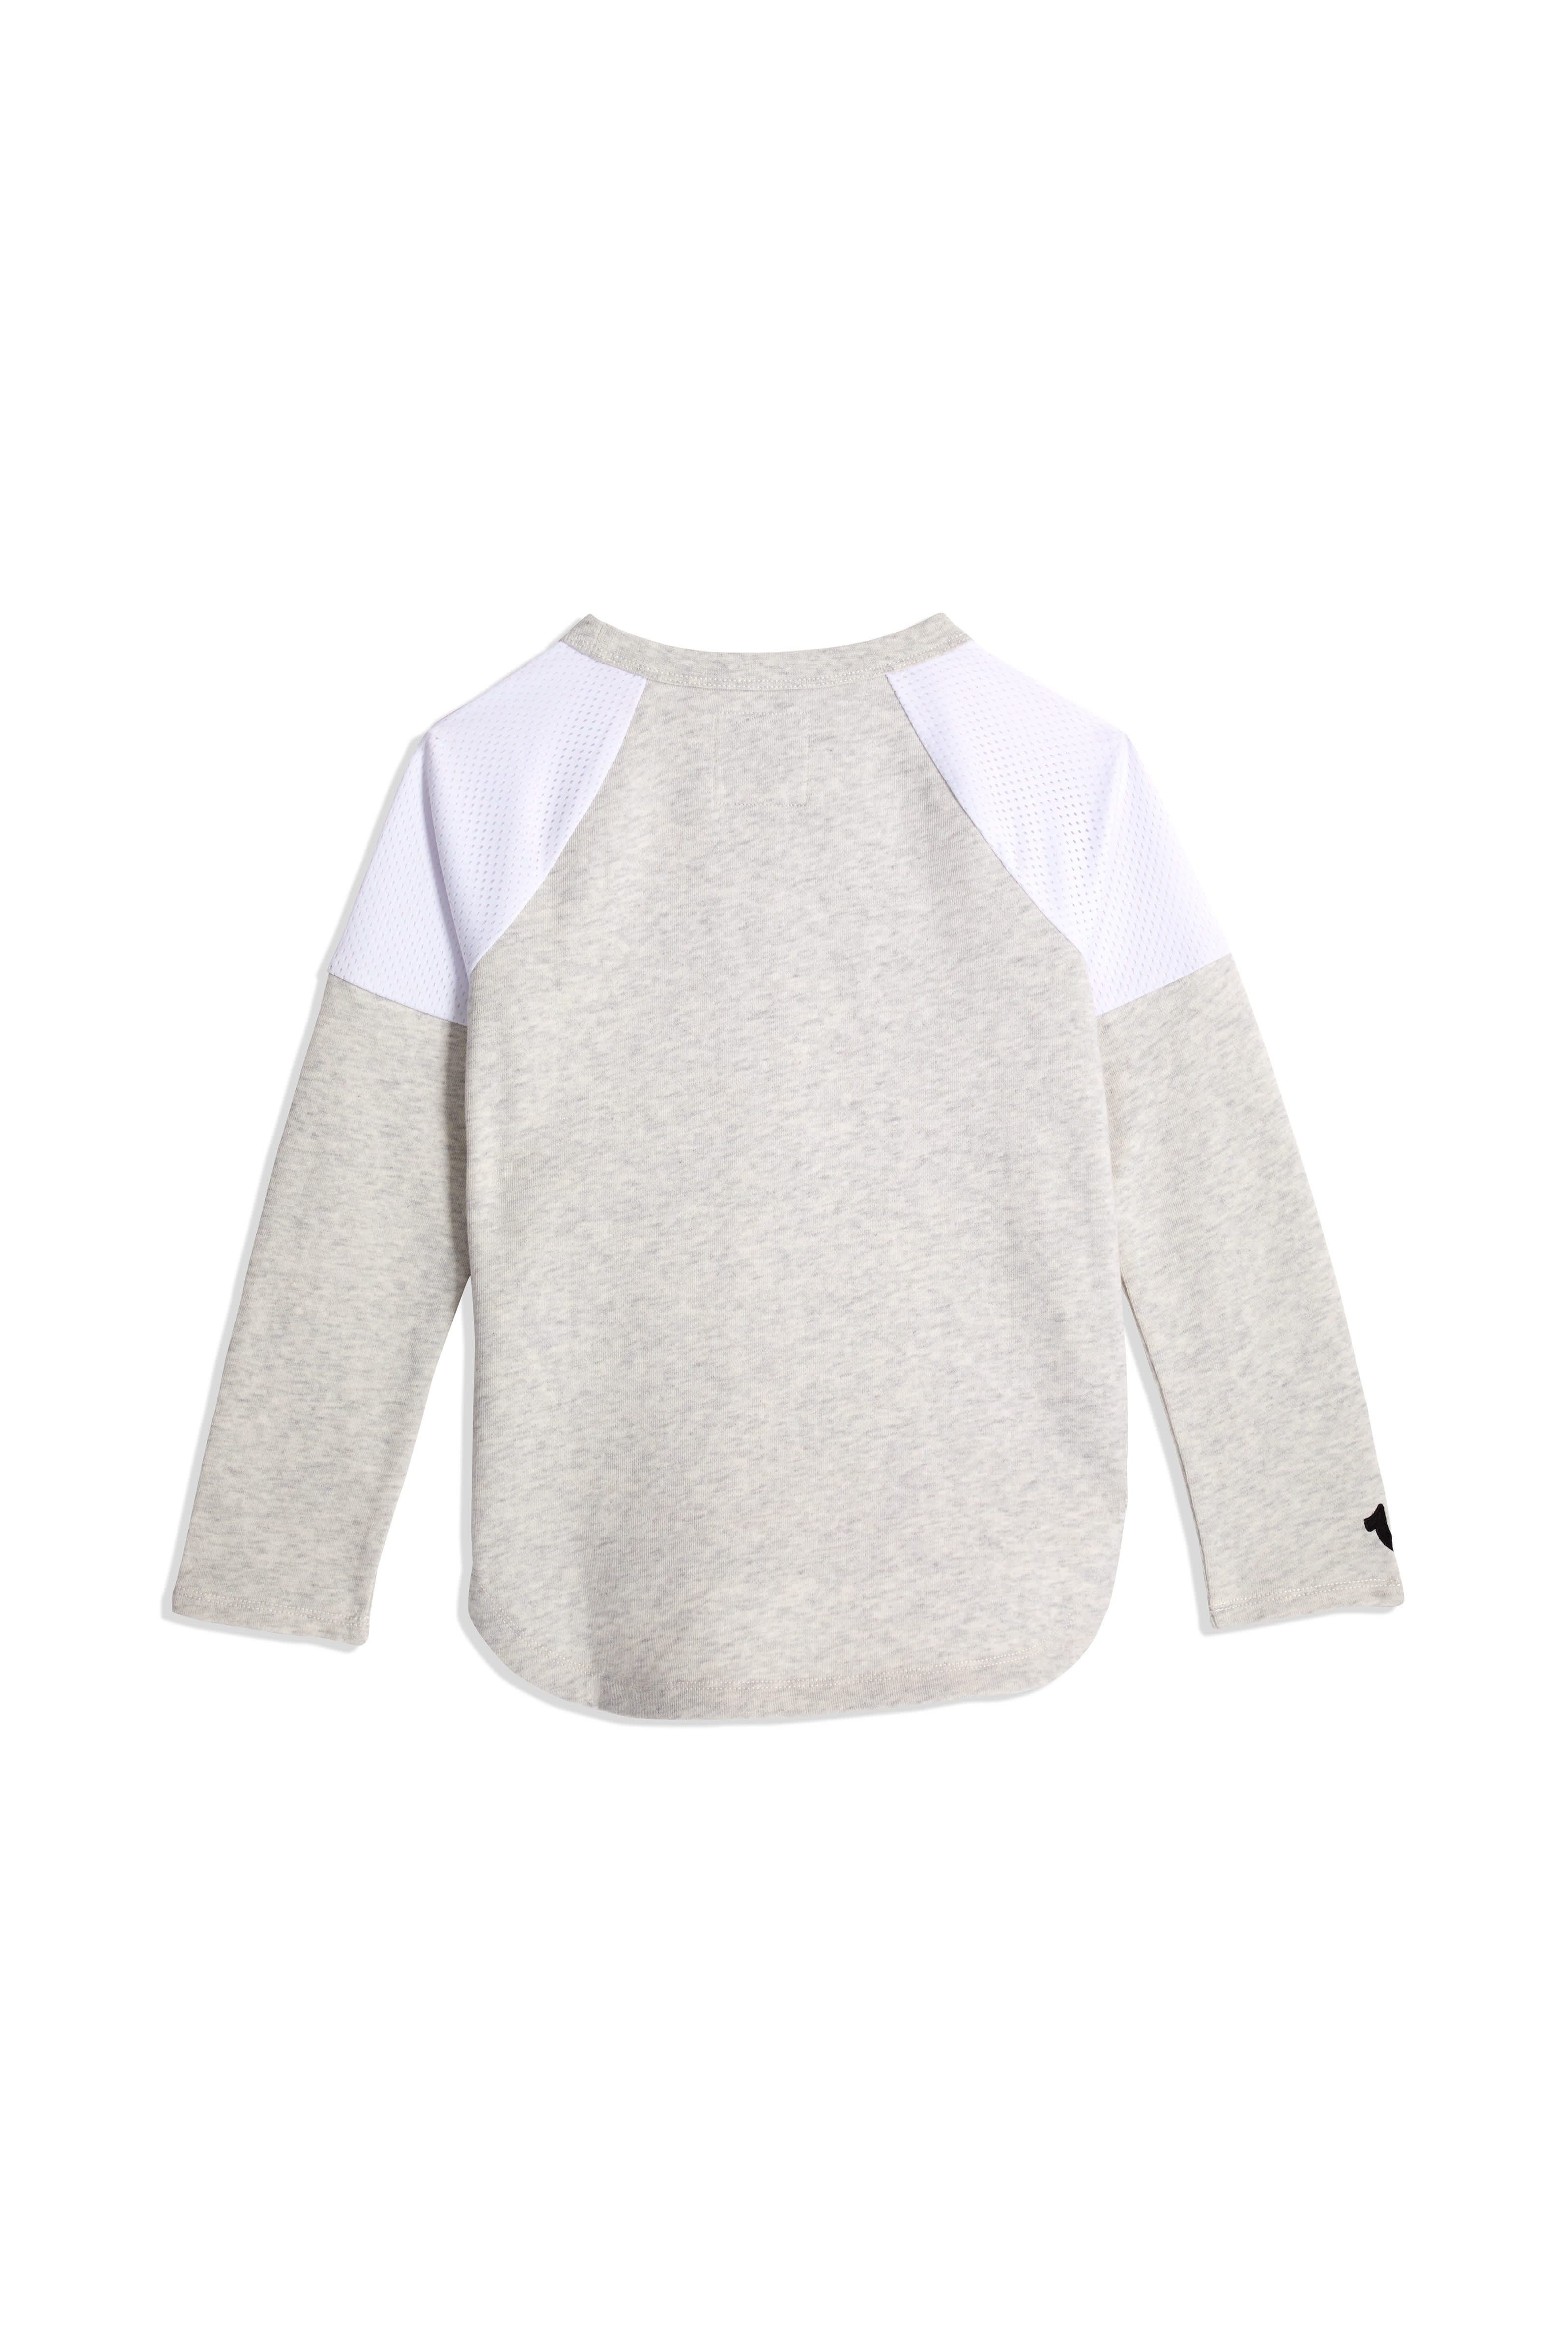 TODDLER/BIG KIDS GIRLS MESH FRENCH TERRY PULLOVER